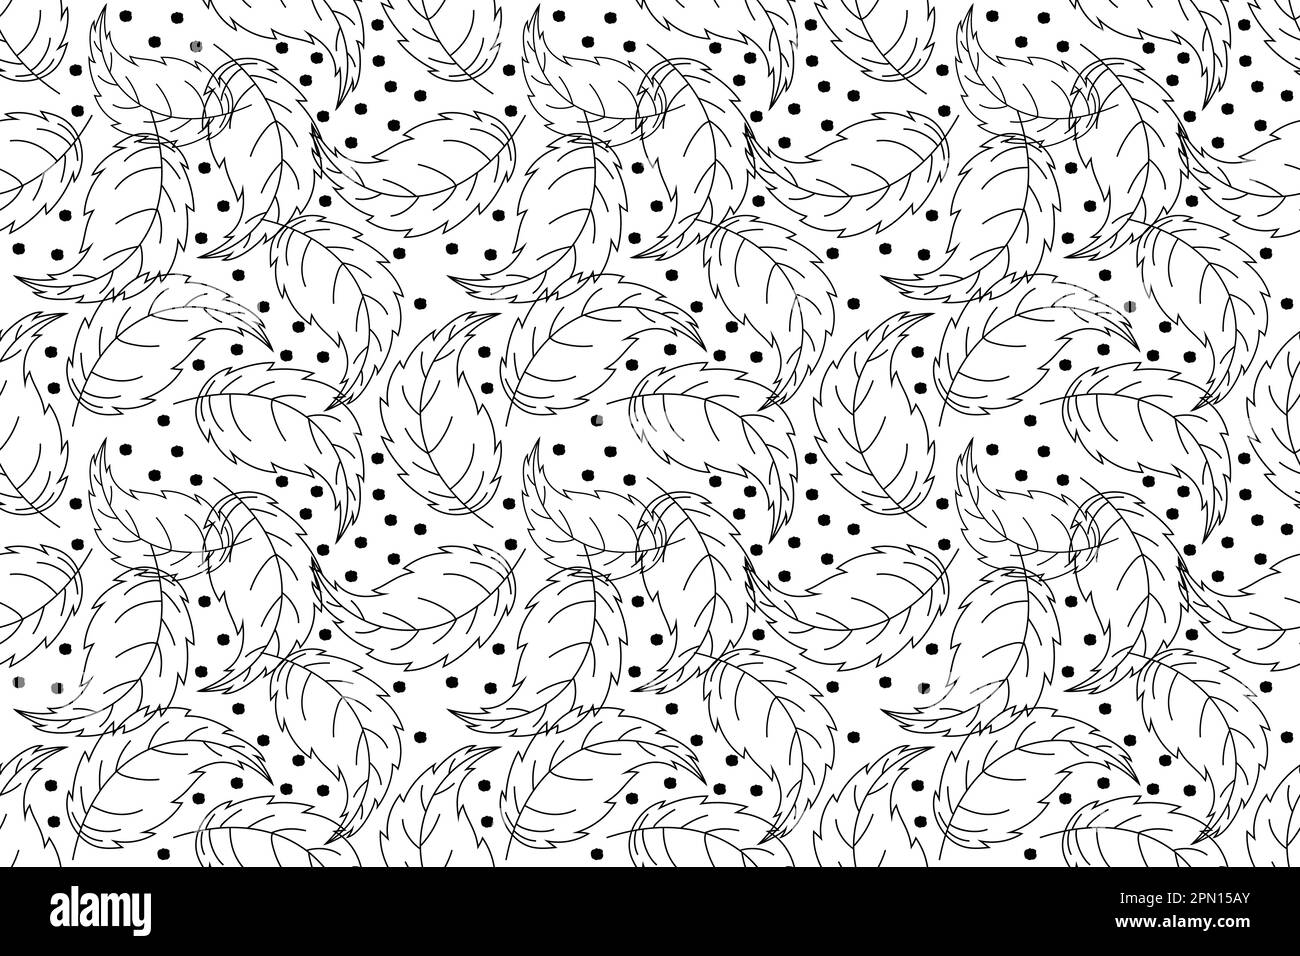 Vector decorative ethnic leaves background. Retro flowers endless repeat pattern. Ethnic monochrome binary doodle texture. Curved doodling black and white background. Vector illustration  Stock Vector